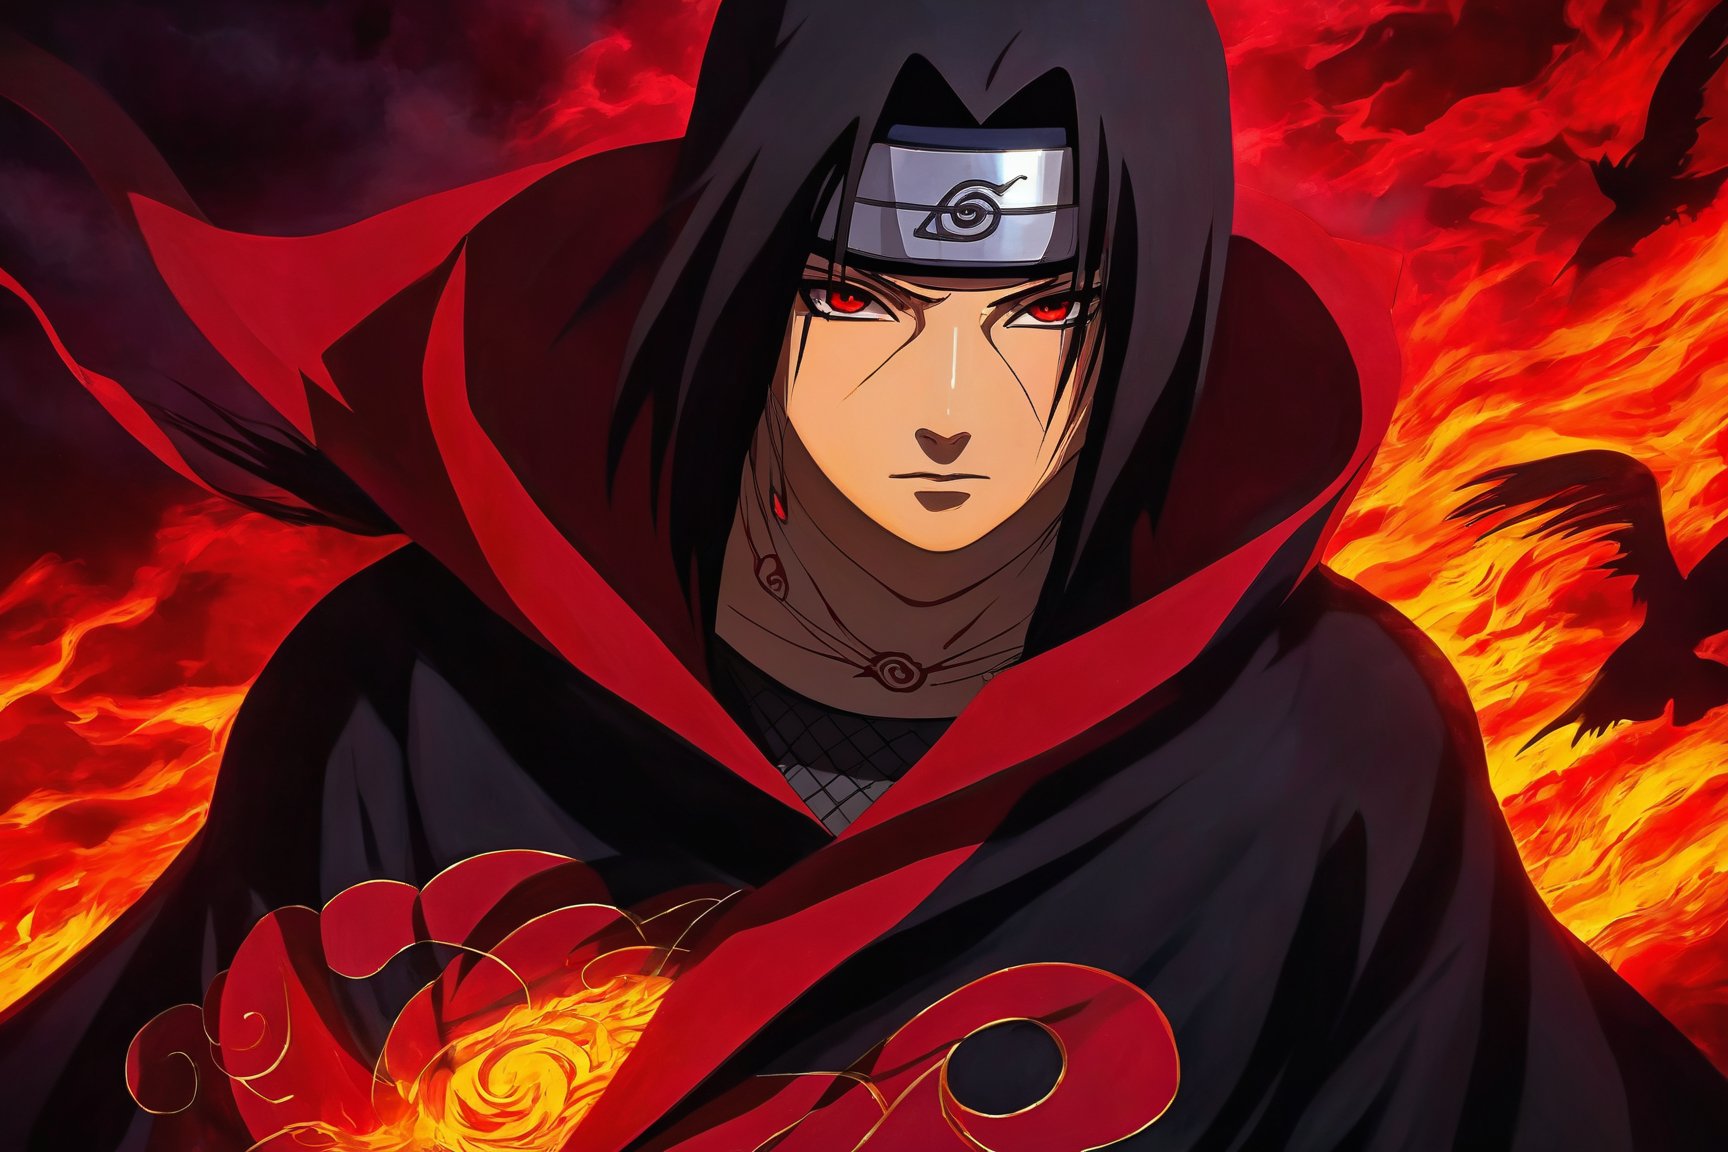 Itachi Uchiha, Sharingan eyes, blood moon background, close up, portrait, piercing gaze, intense expression, dark and mysterious atmosphere, black hair, flowing in the wind, red and black cloak, embroidered Uchiha clan symbol, detailed facial features, strong and defined jawline, intense stare, red iris with three black tomoe, illusionary powers, powerful ninja, skilled in fire style jutsu, mysterious aura, strong presence, deep shadows, dramatic lighting, haunting beauty, high contrast, chiaroscuro effect, vibrant red color scheme, ominous and eerie mood, masterful painting techniques, oil on canvas, hyperrealistic style, finest brushstrokes, intricate details, supernatural element, enigma, epic and captivating artwork. (best quality, 4k, highres, realistic:1.2), ultra-detailed, vivid colors, studio lighting